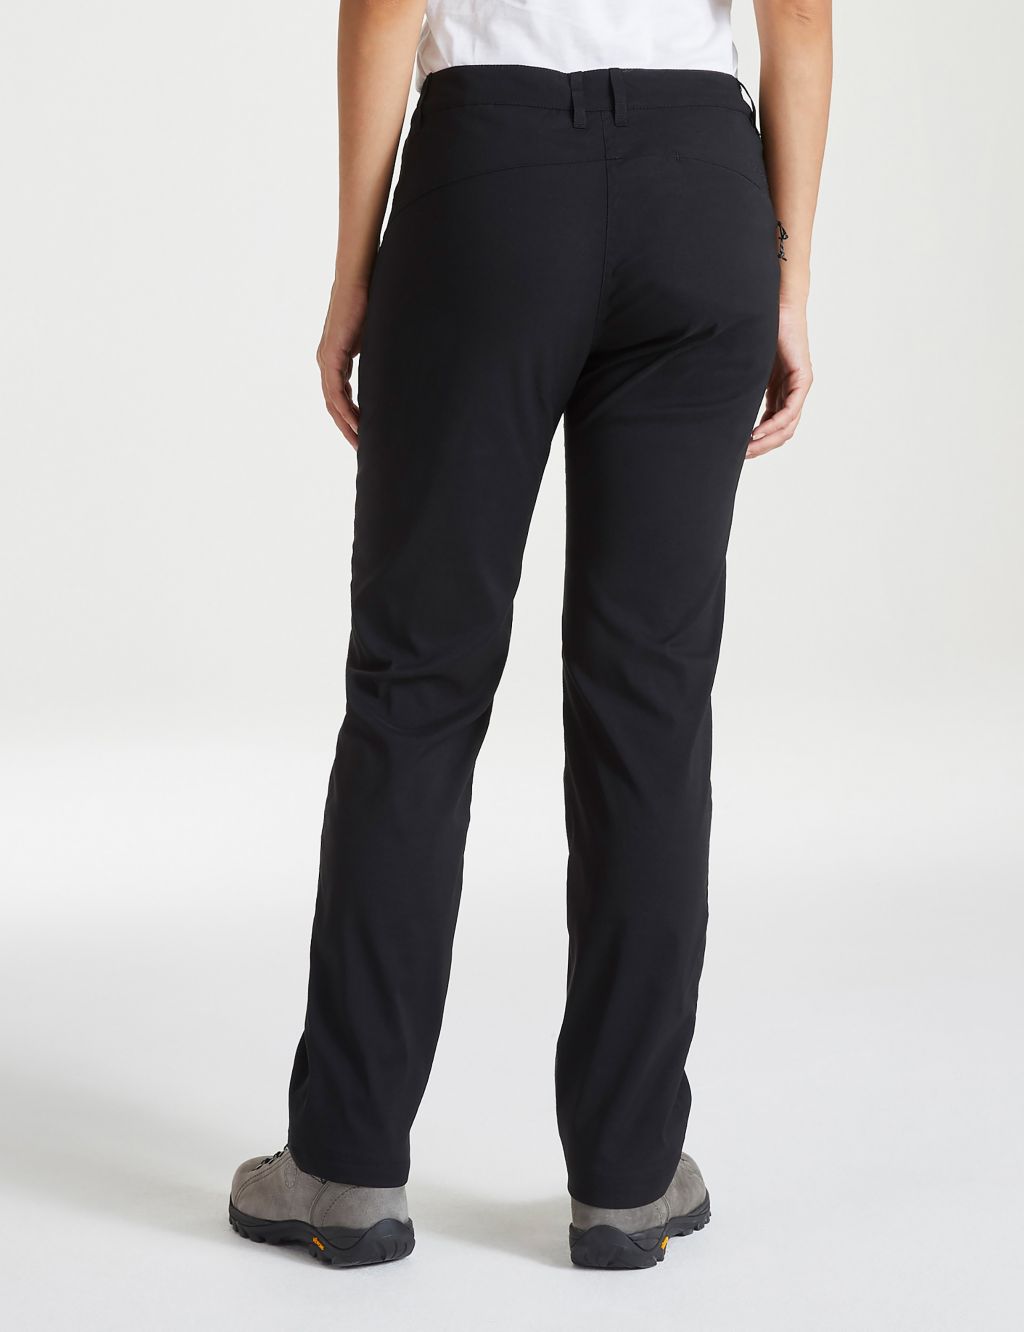 Kiwi Pro Lined Trousers 4 of 6